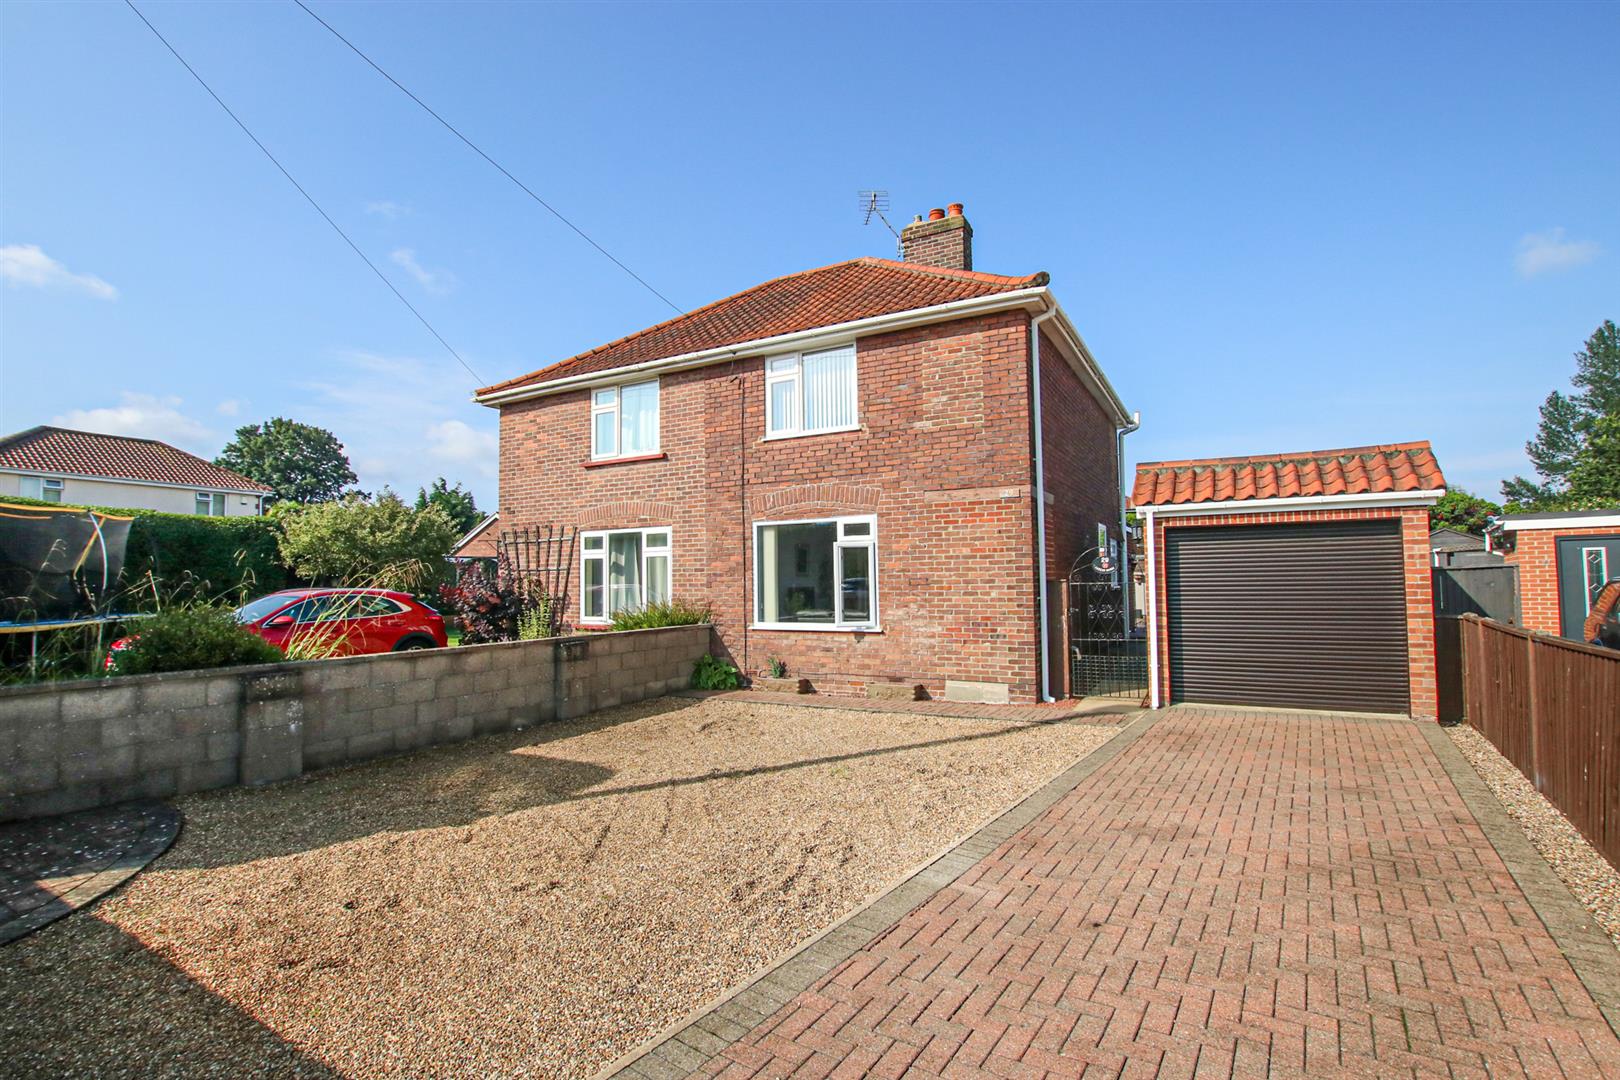 Cozens-Hardy Road, Sprowston